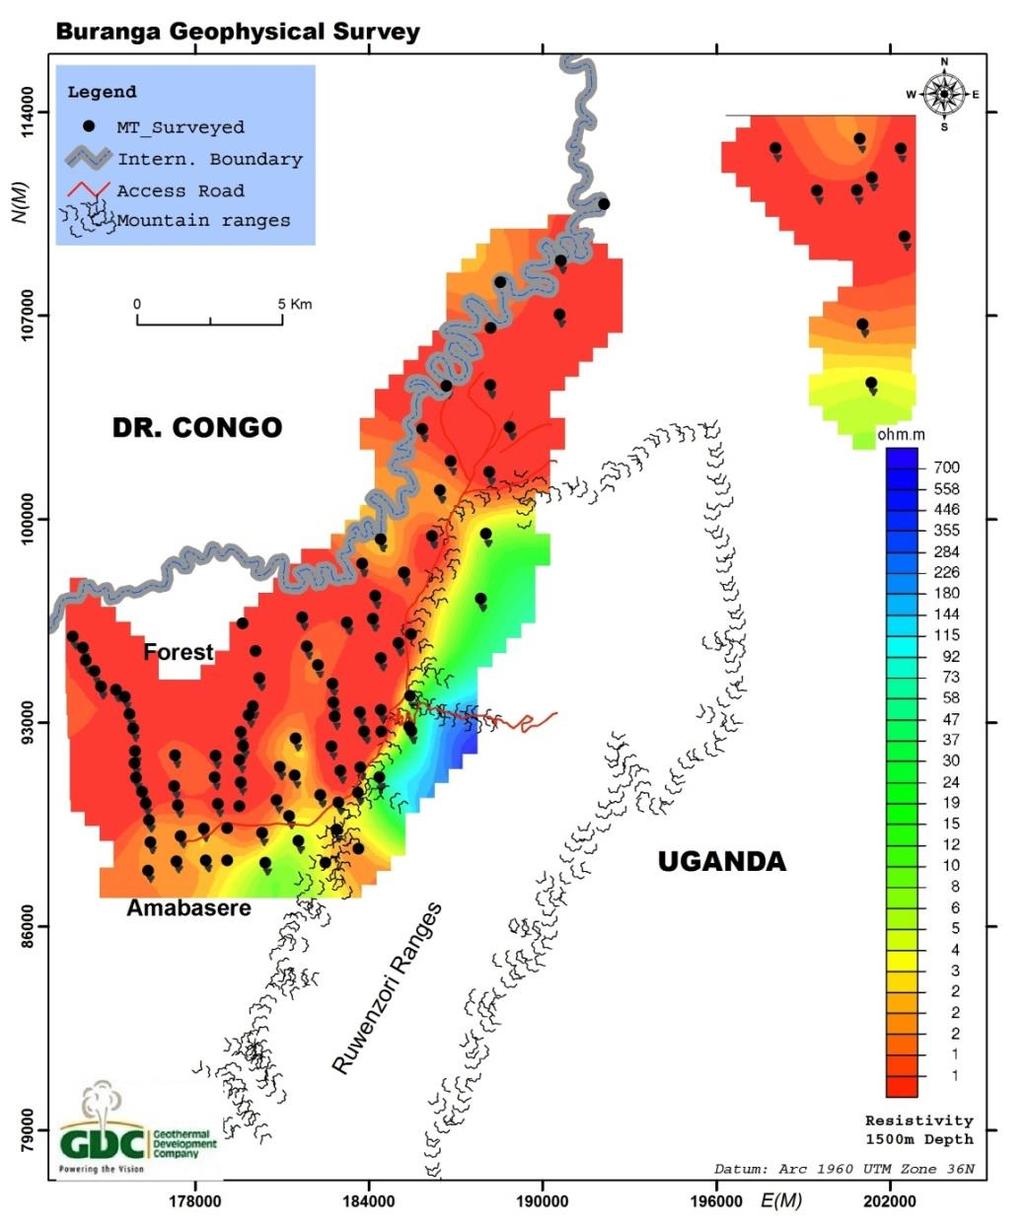 Iso-depth Resistivity map at 1500 m depth ( 1 km b.s.l) Extensive low resistivity anomaly possibly due